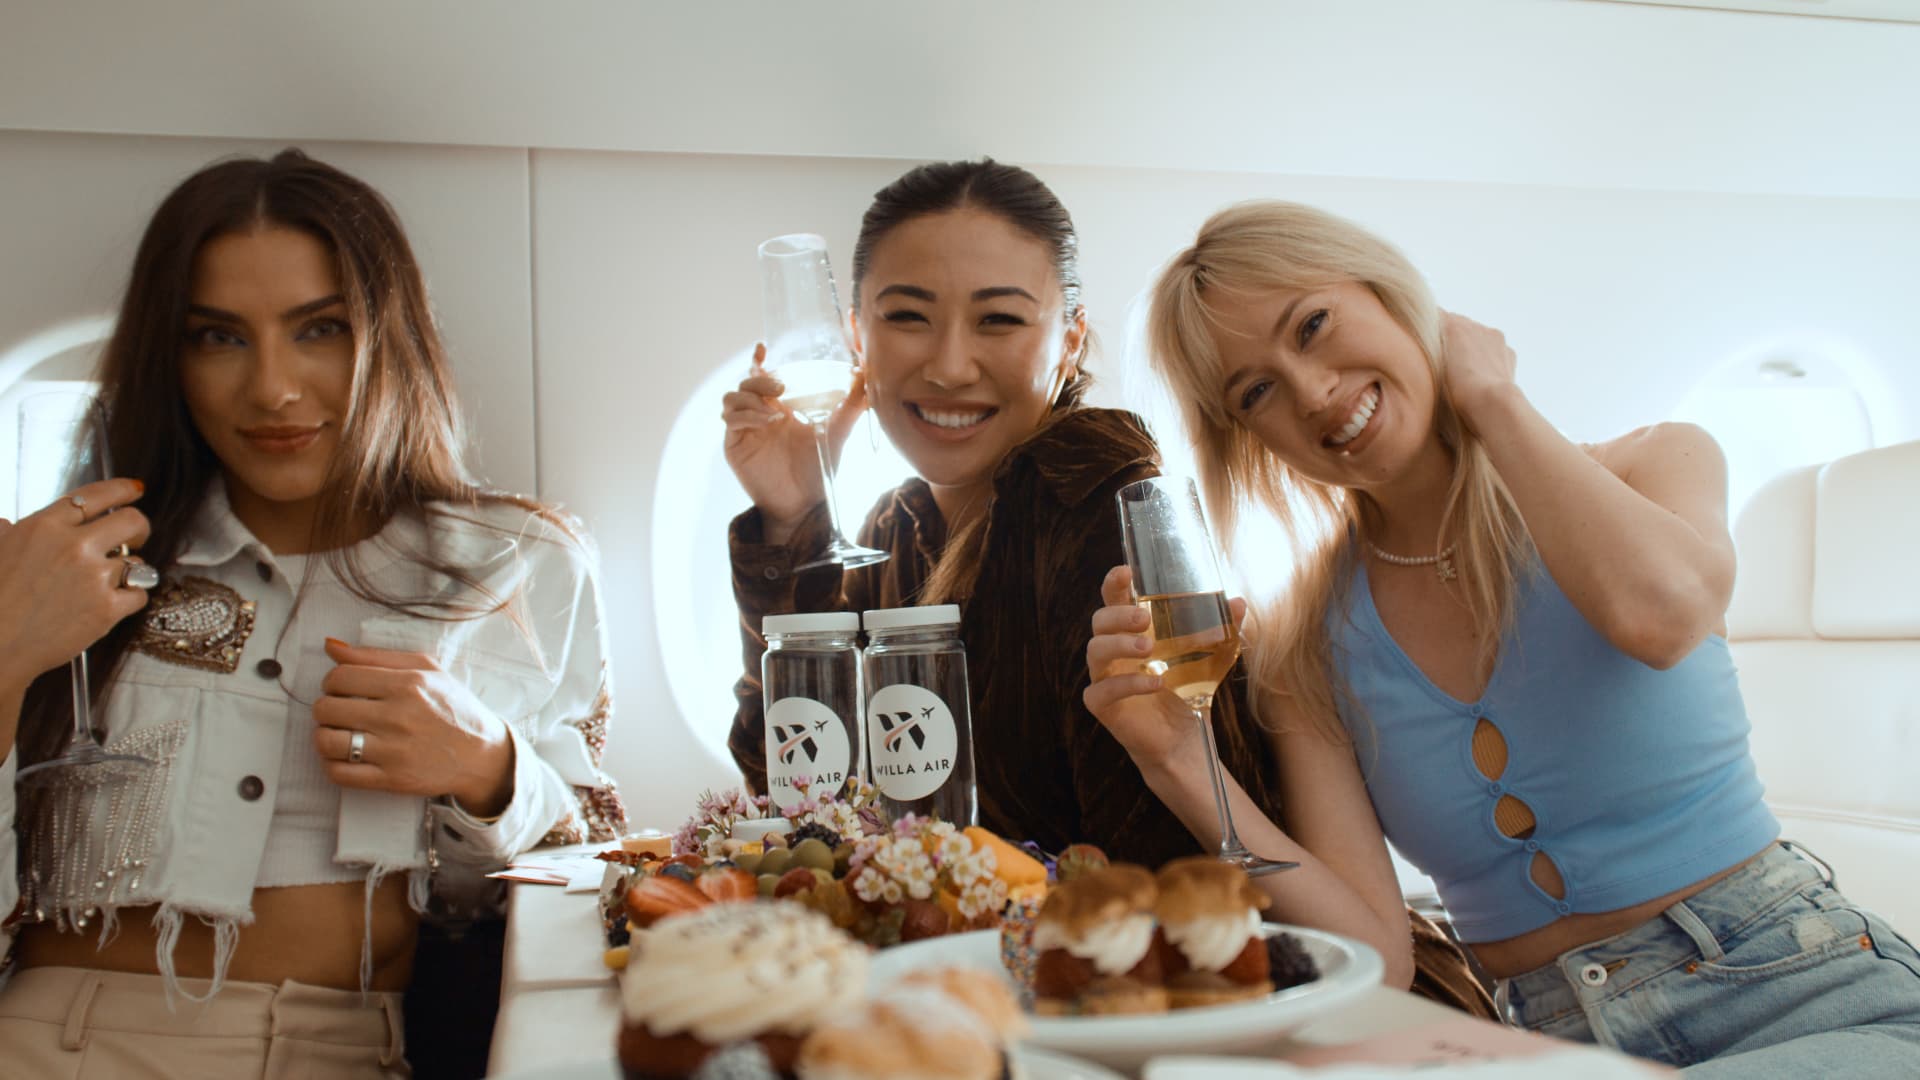 A promotional photo from Willa Air showing what passengers can expect on the new airline exclusively for creators and influencers.